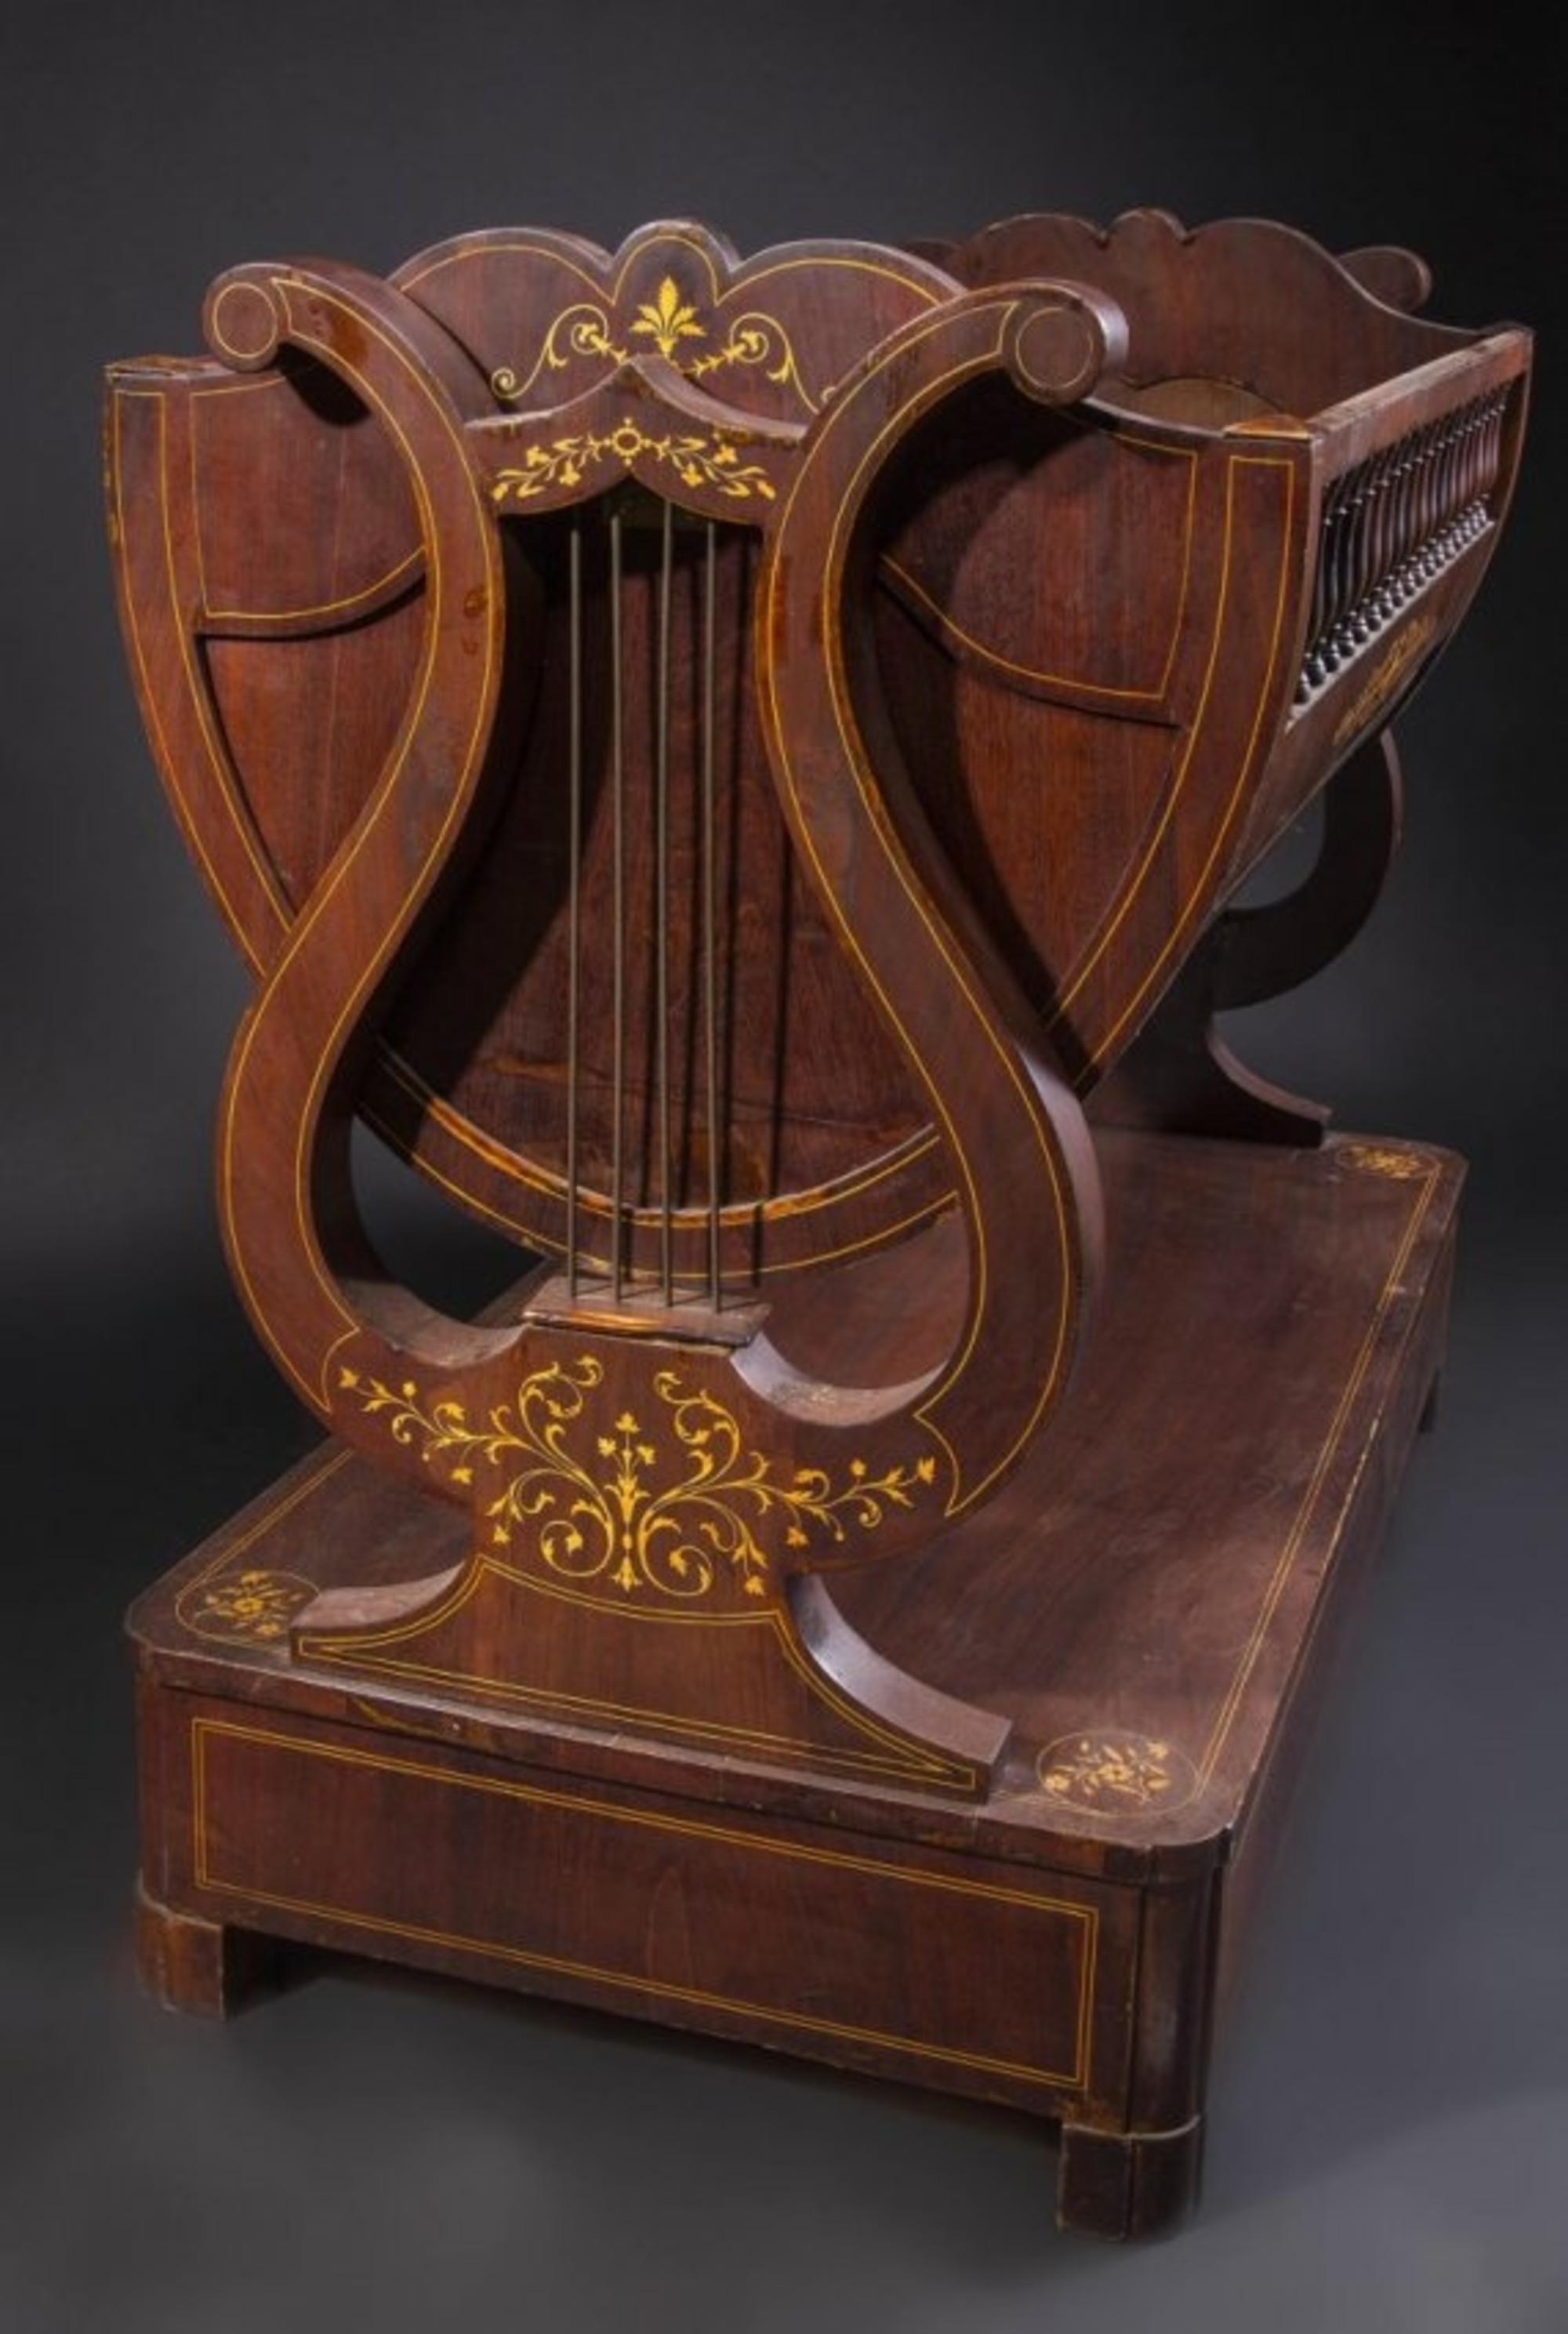 Wood Mahogany Cradle, Louis Philippe or North European Neoclassical, Mid-19th Century For Sale